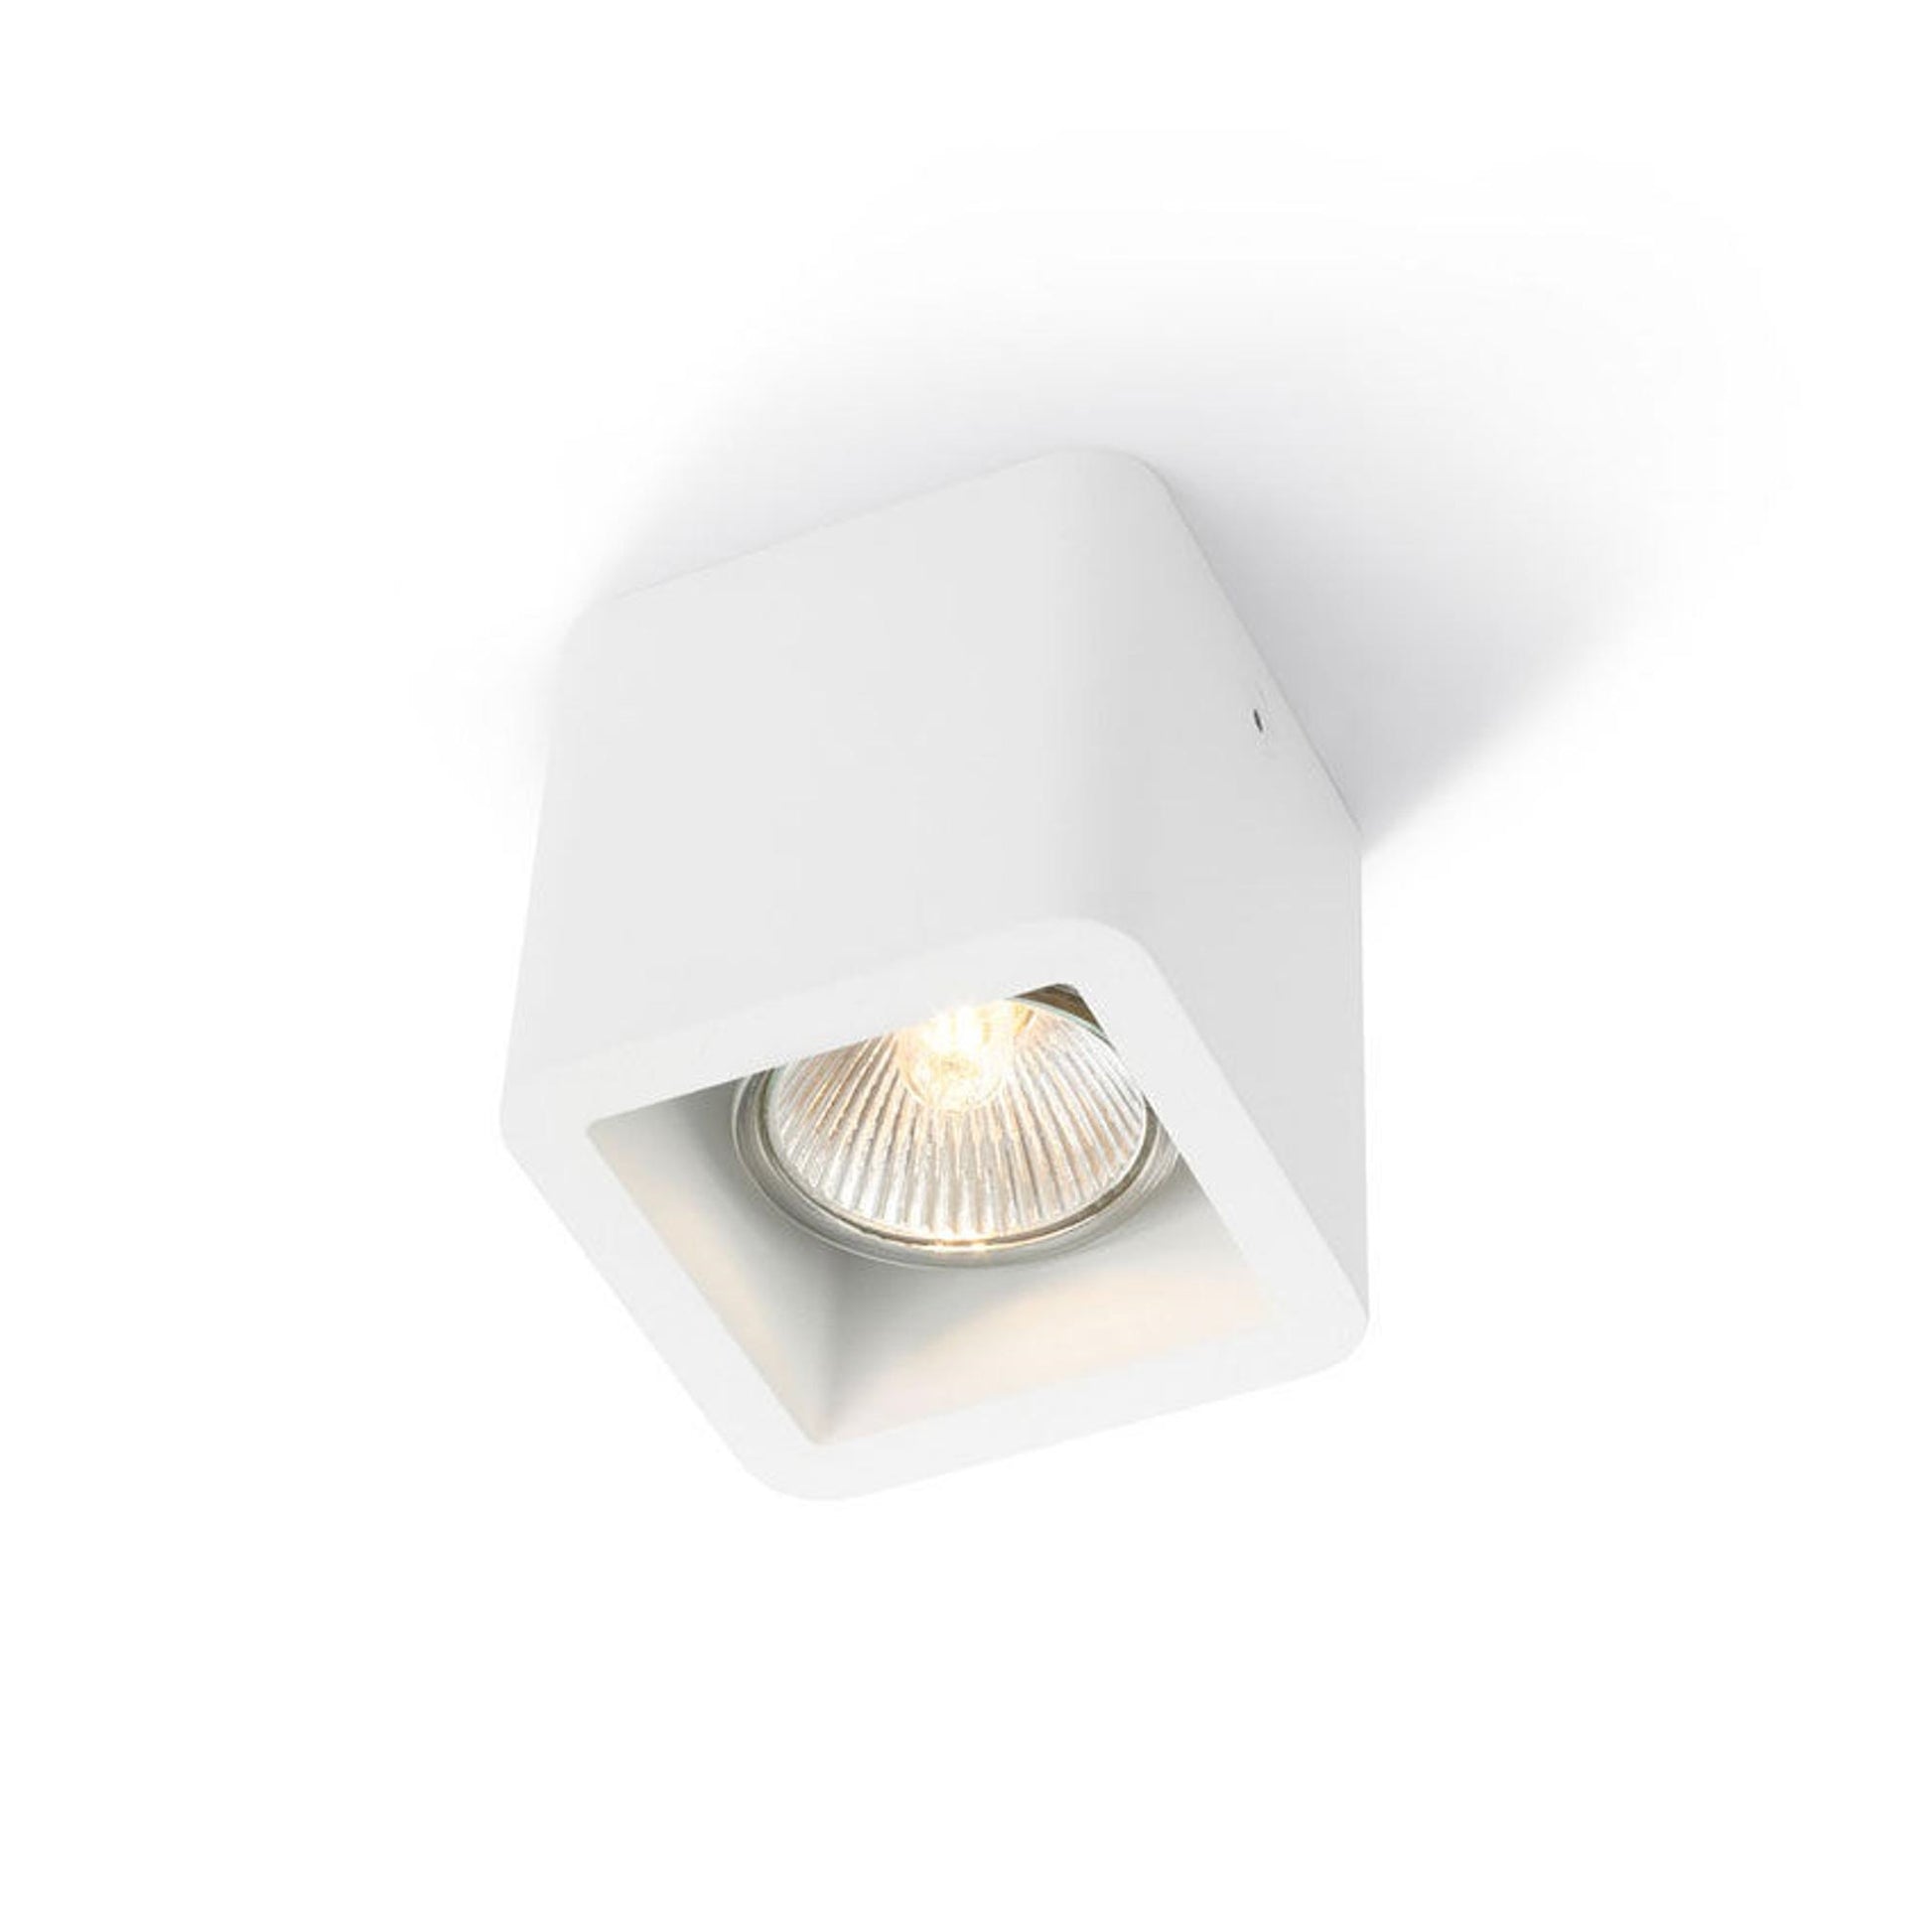 Trizo 21 Code 1 IN Spot & Ceiling Lamp by Trizo21 #White